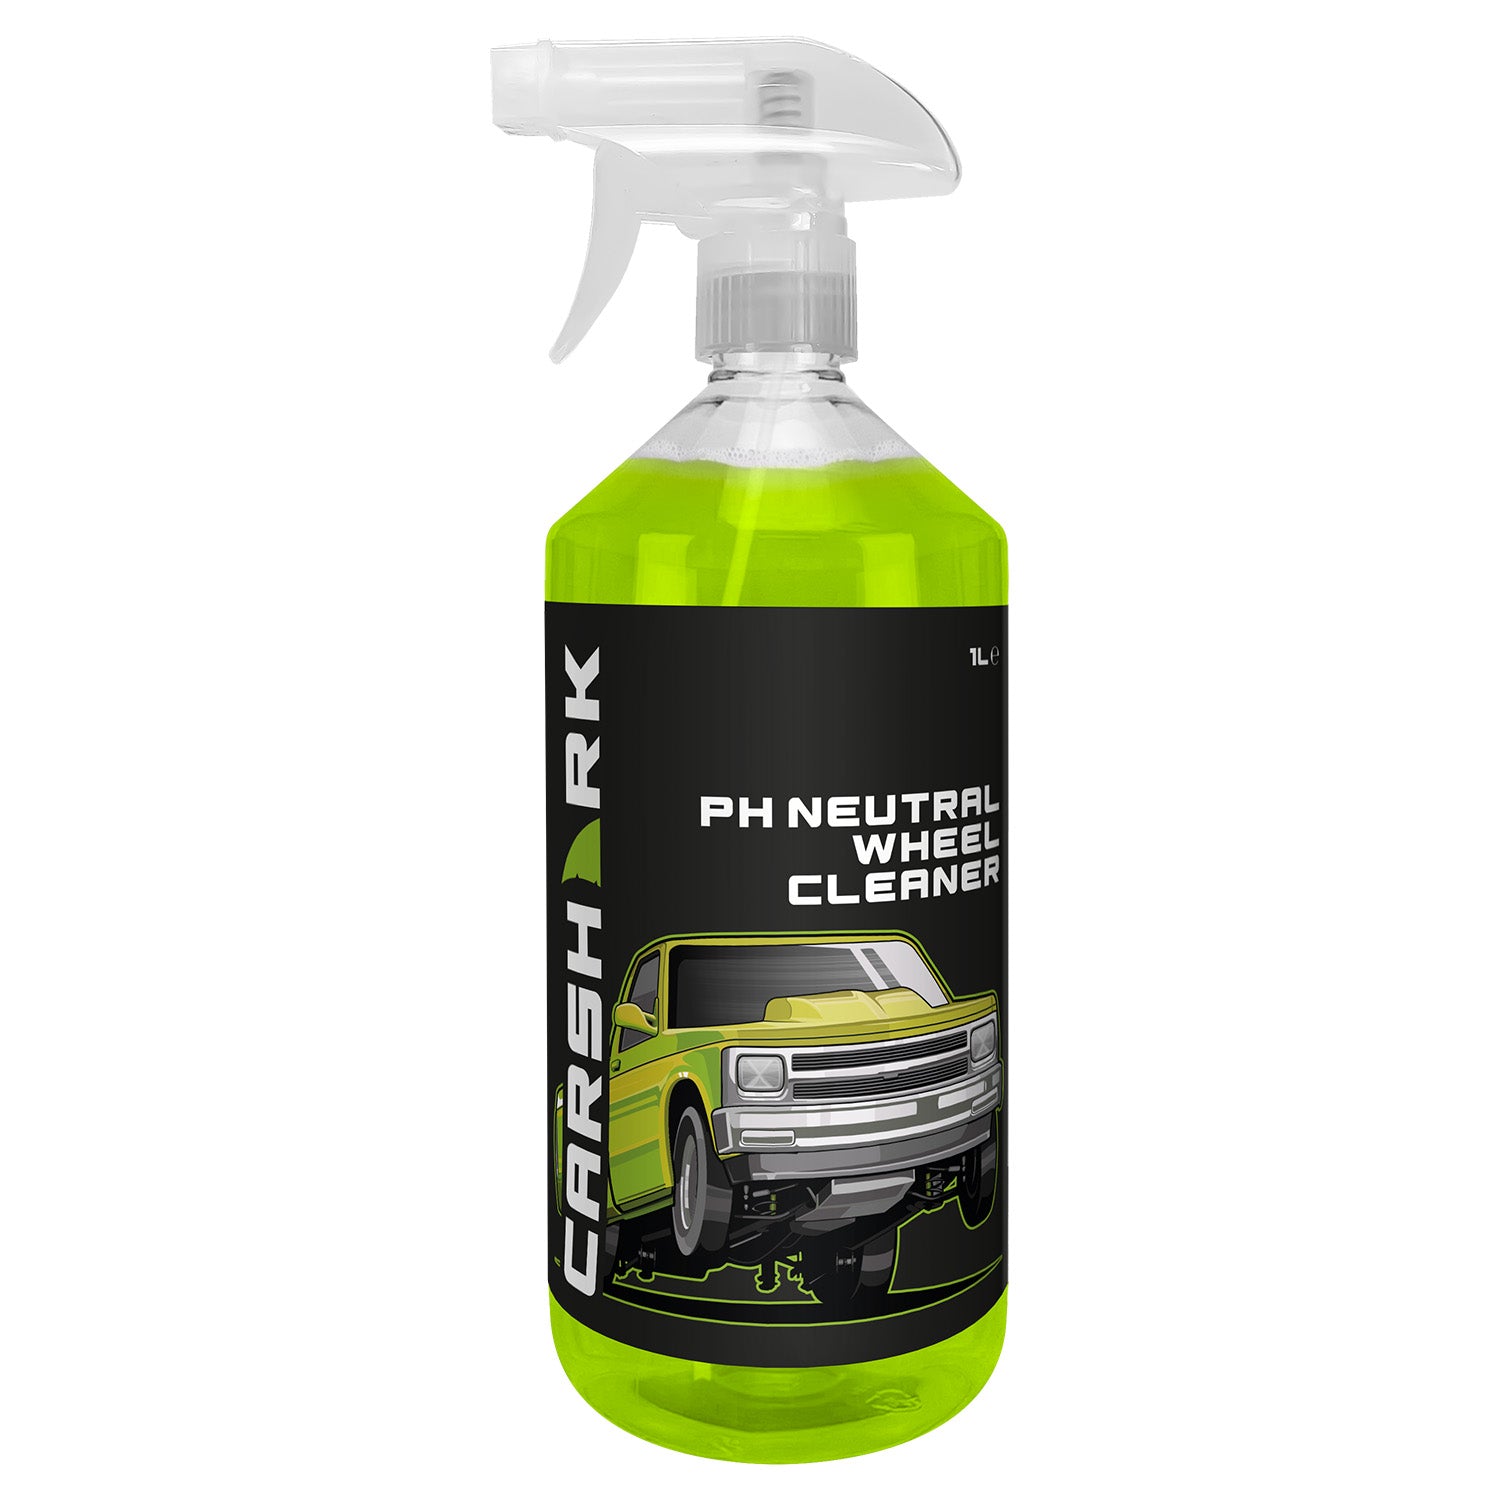 CARSHARK PH Neutral Wheel Cleaner 1 Litre - Effective Cleaning for All Wheels